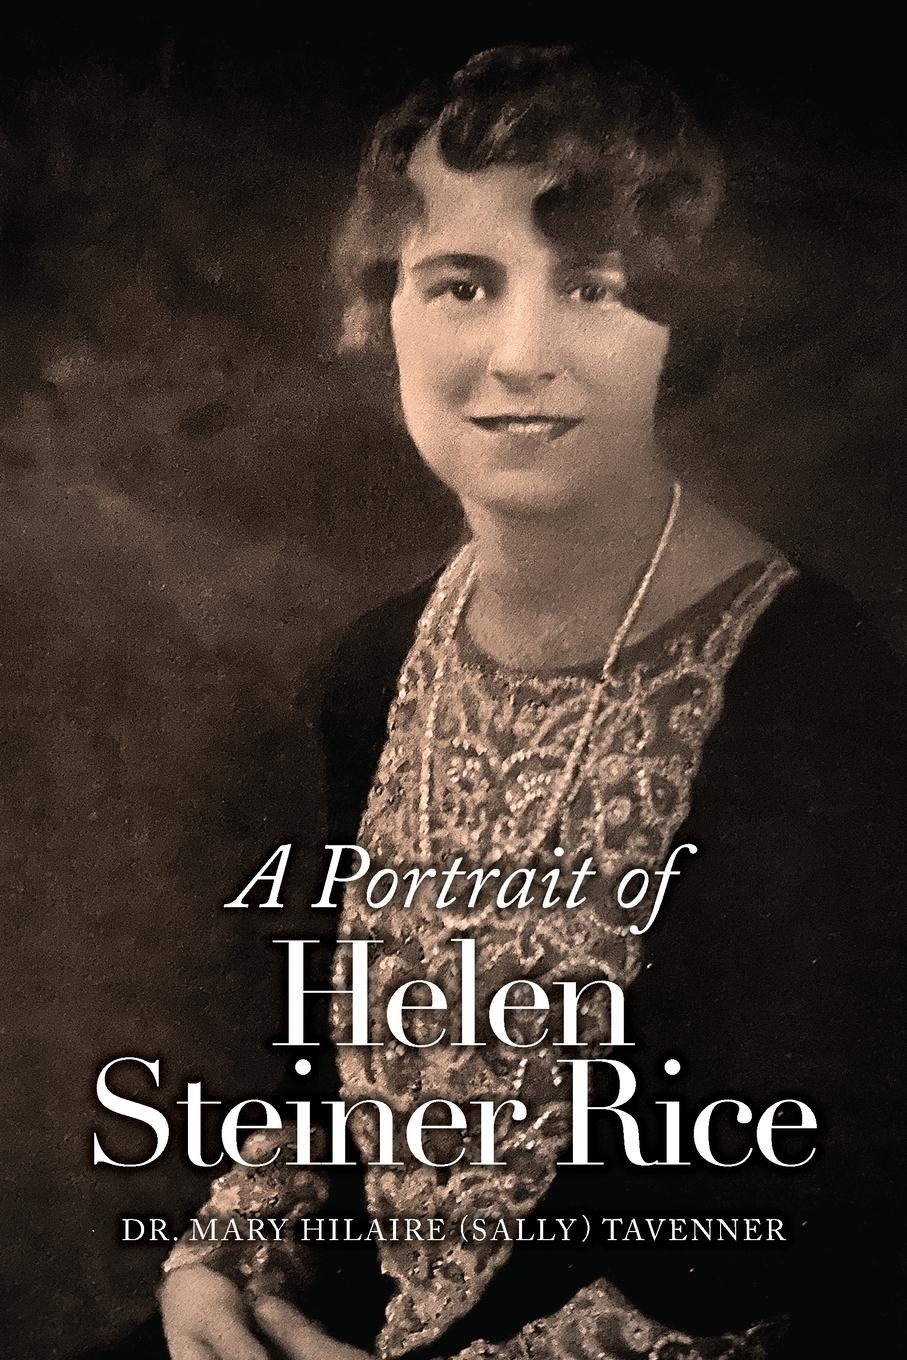 A Portrait of Helen Steiner Rice - Tavenner, Mary Hilaire (Sally)